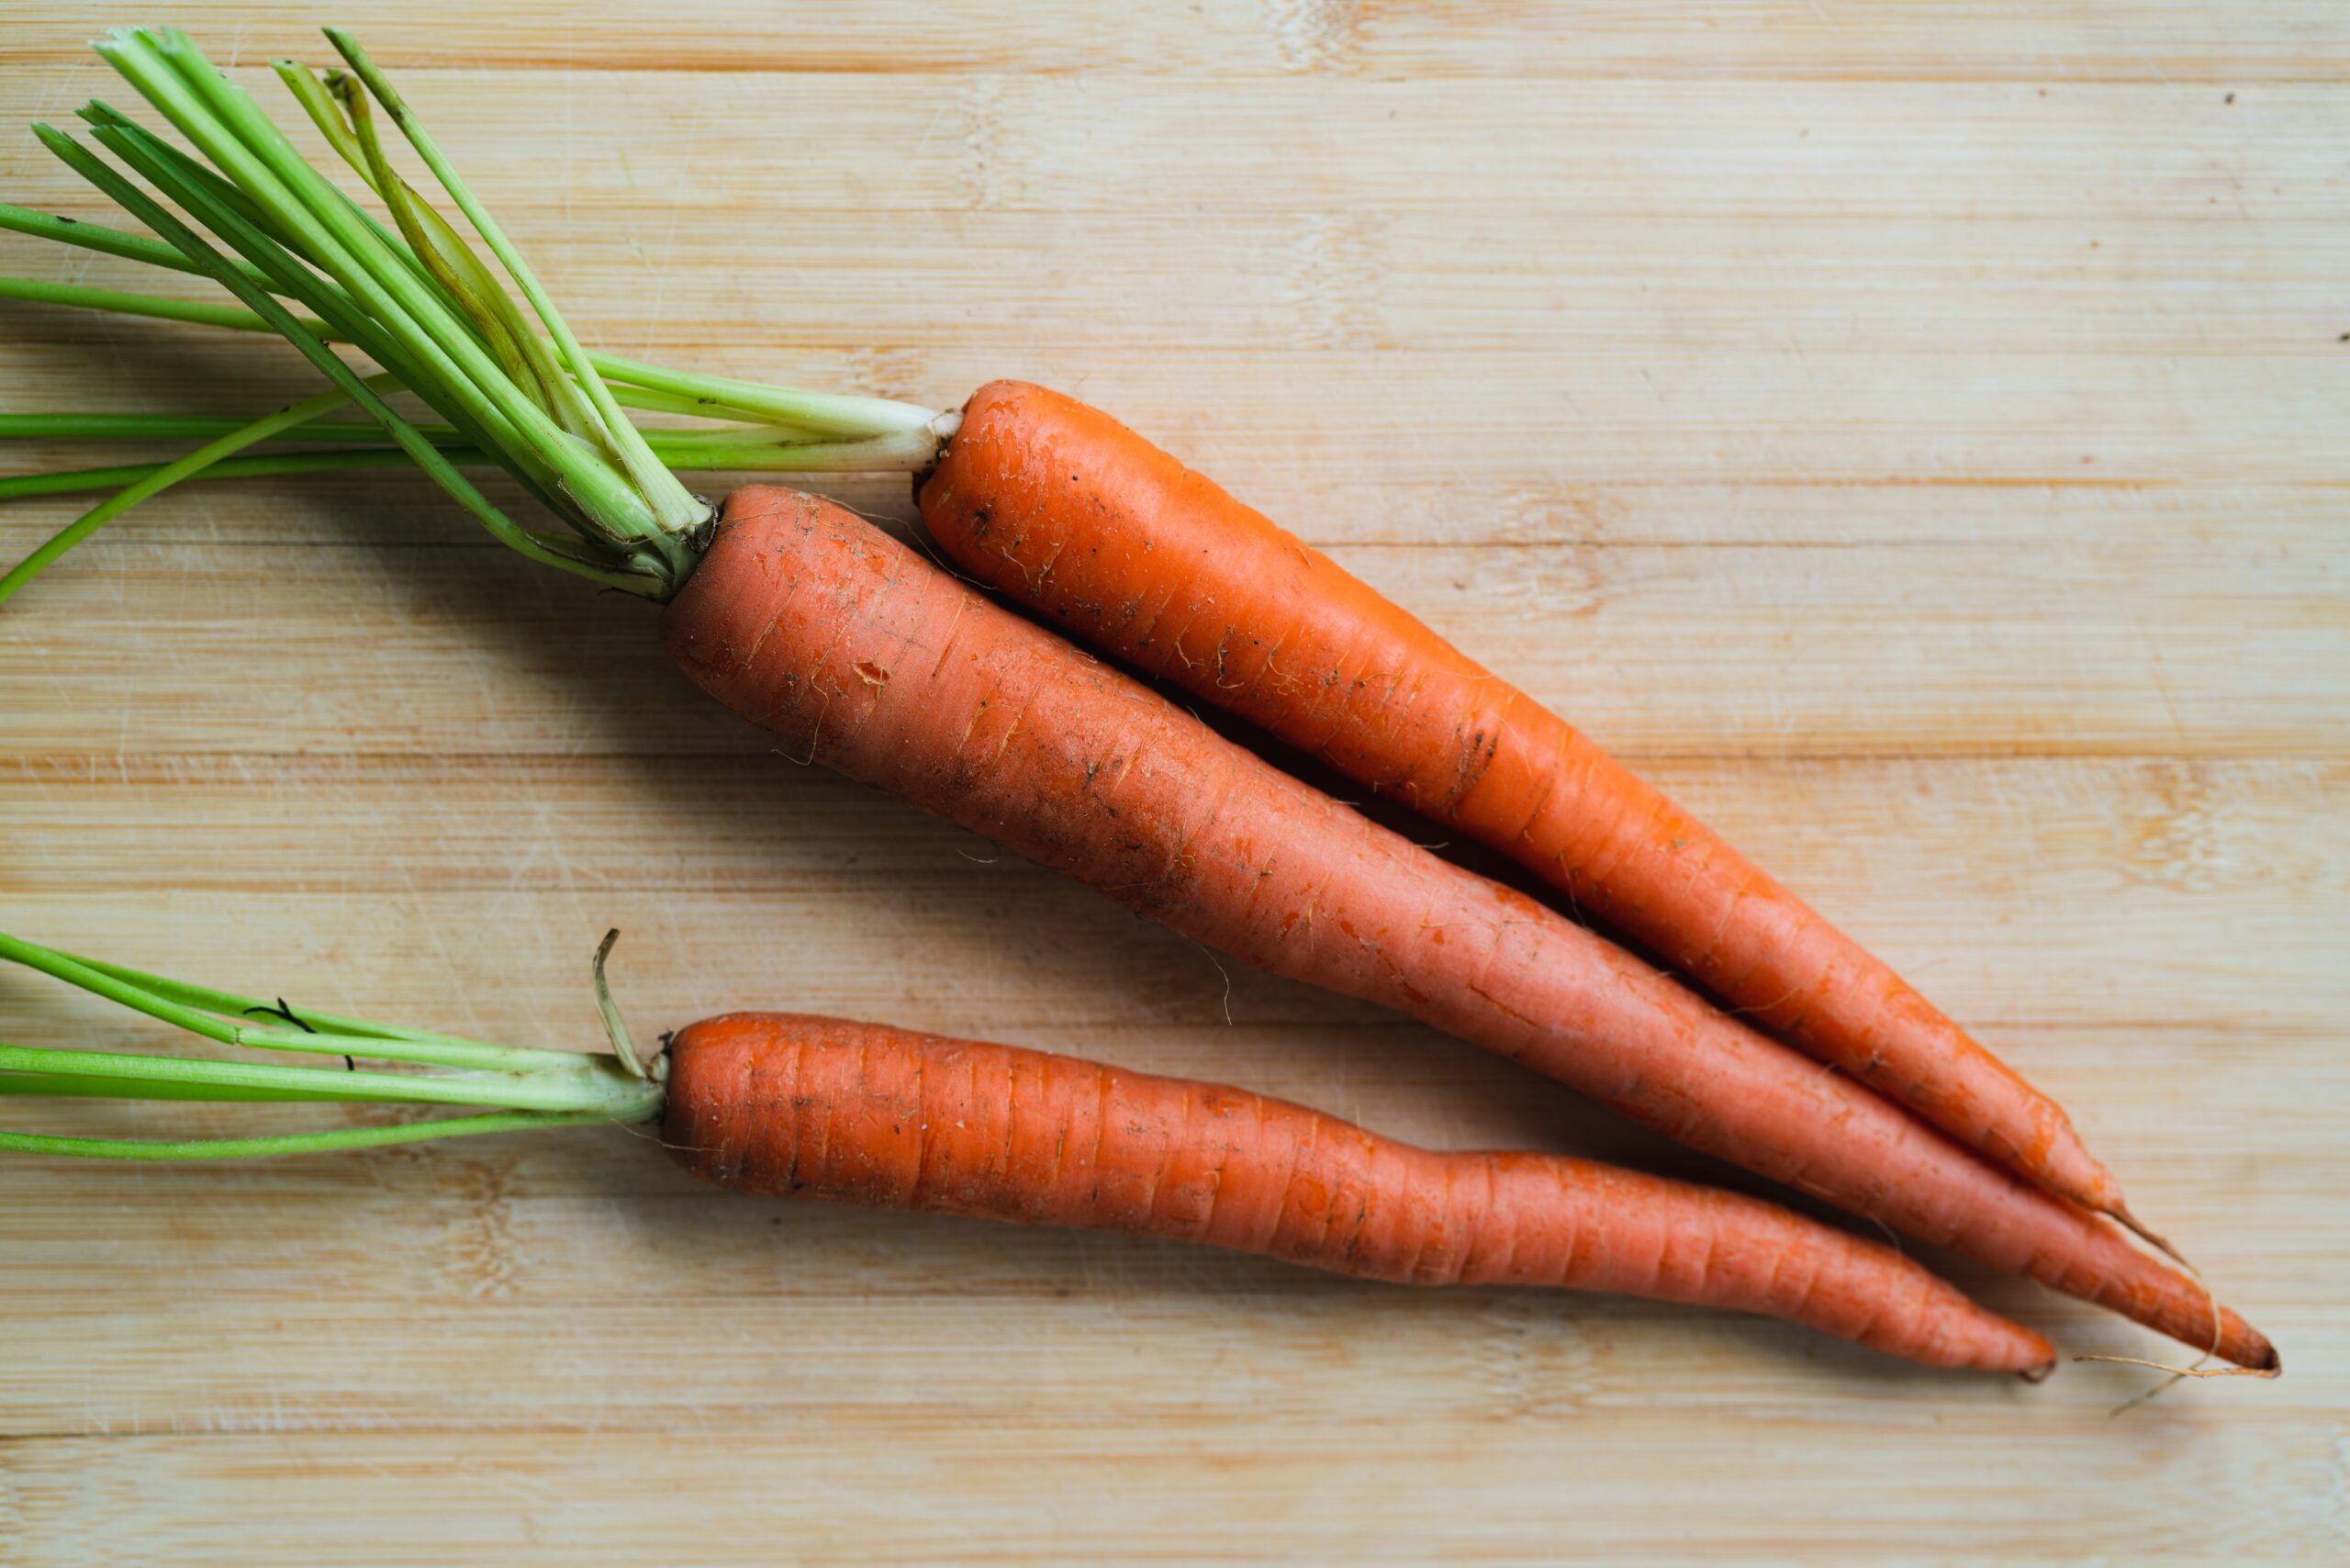 Carrots, learn the health benefits for beauty, weight management and weightloss with Cassandra Austin of Casstronomy